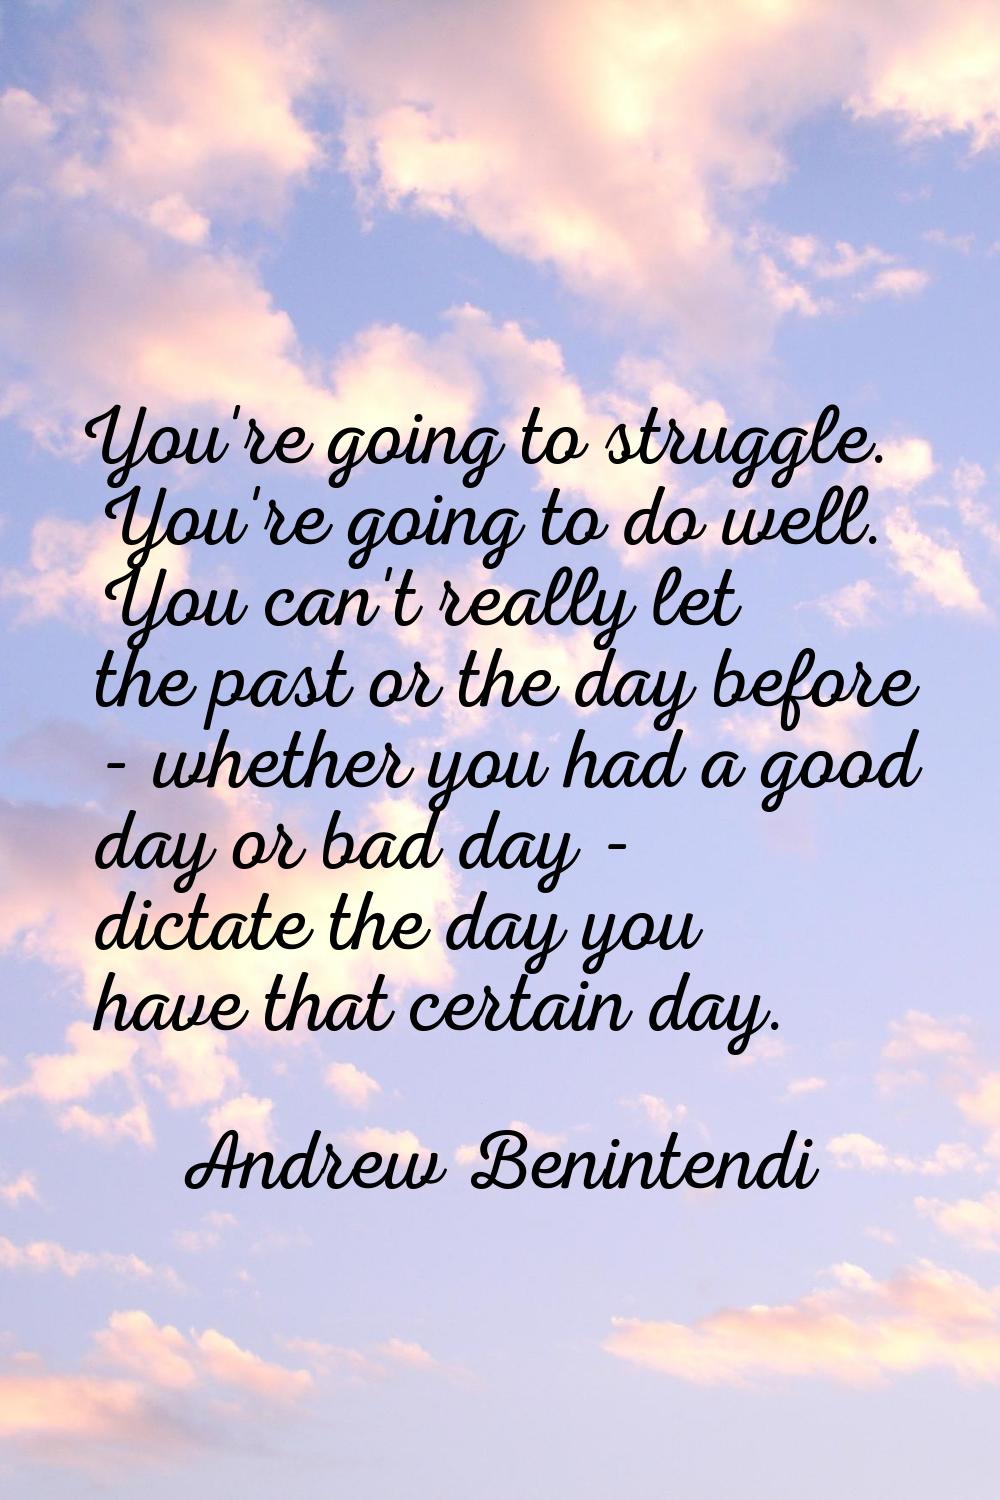 You're going to struggle. You're going to do well. You can't really let the past or the day before 